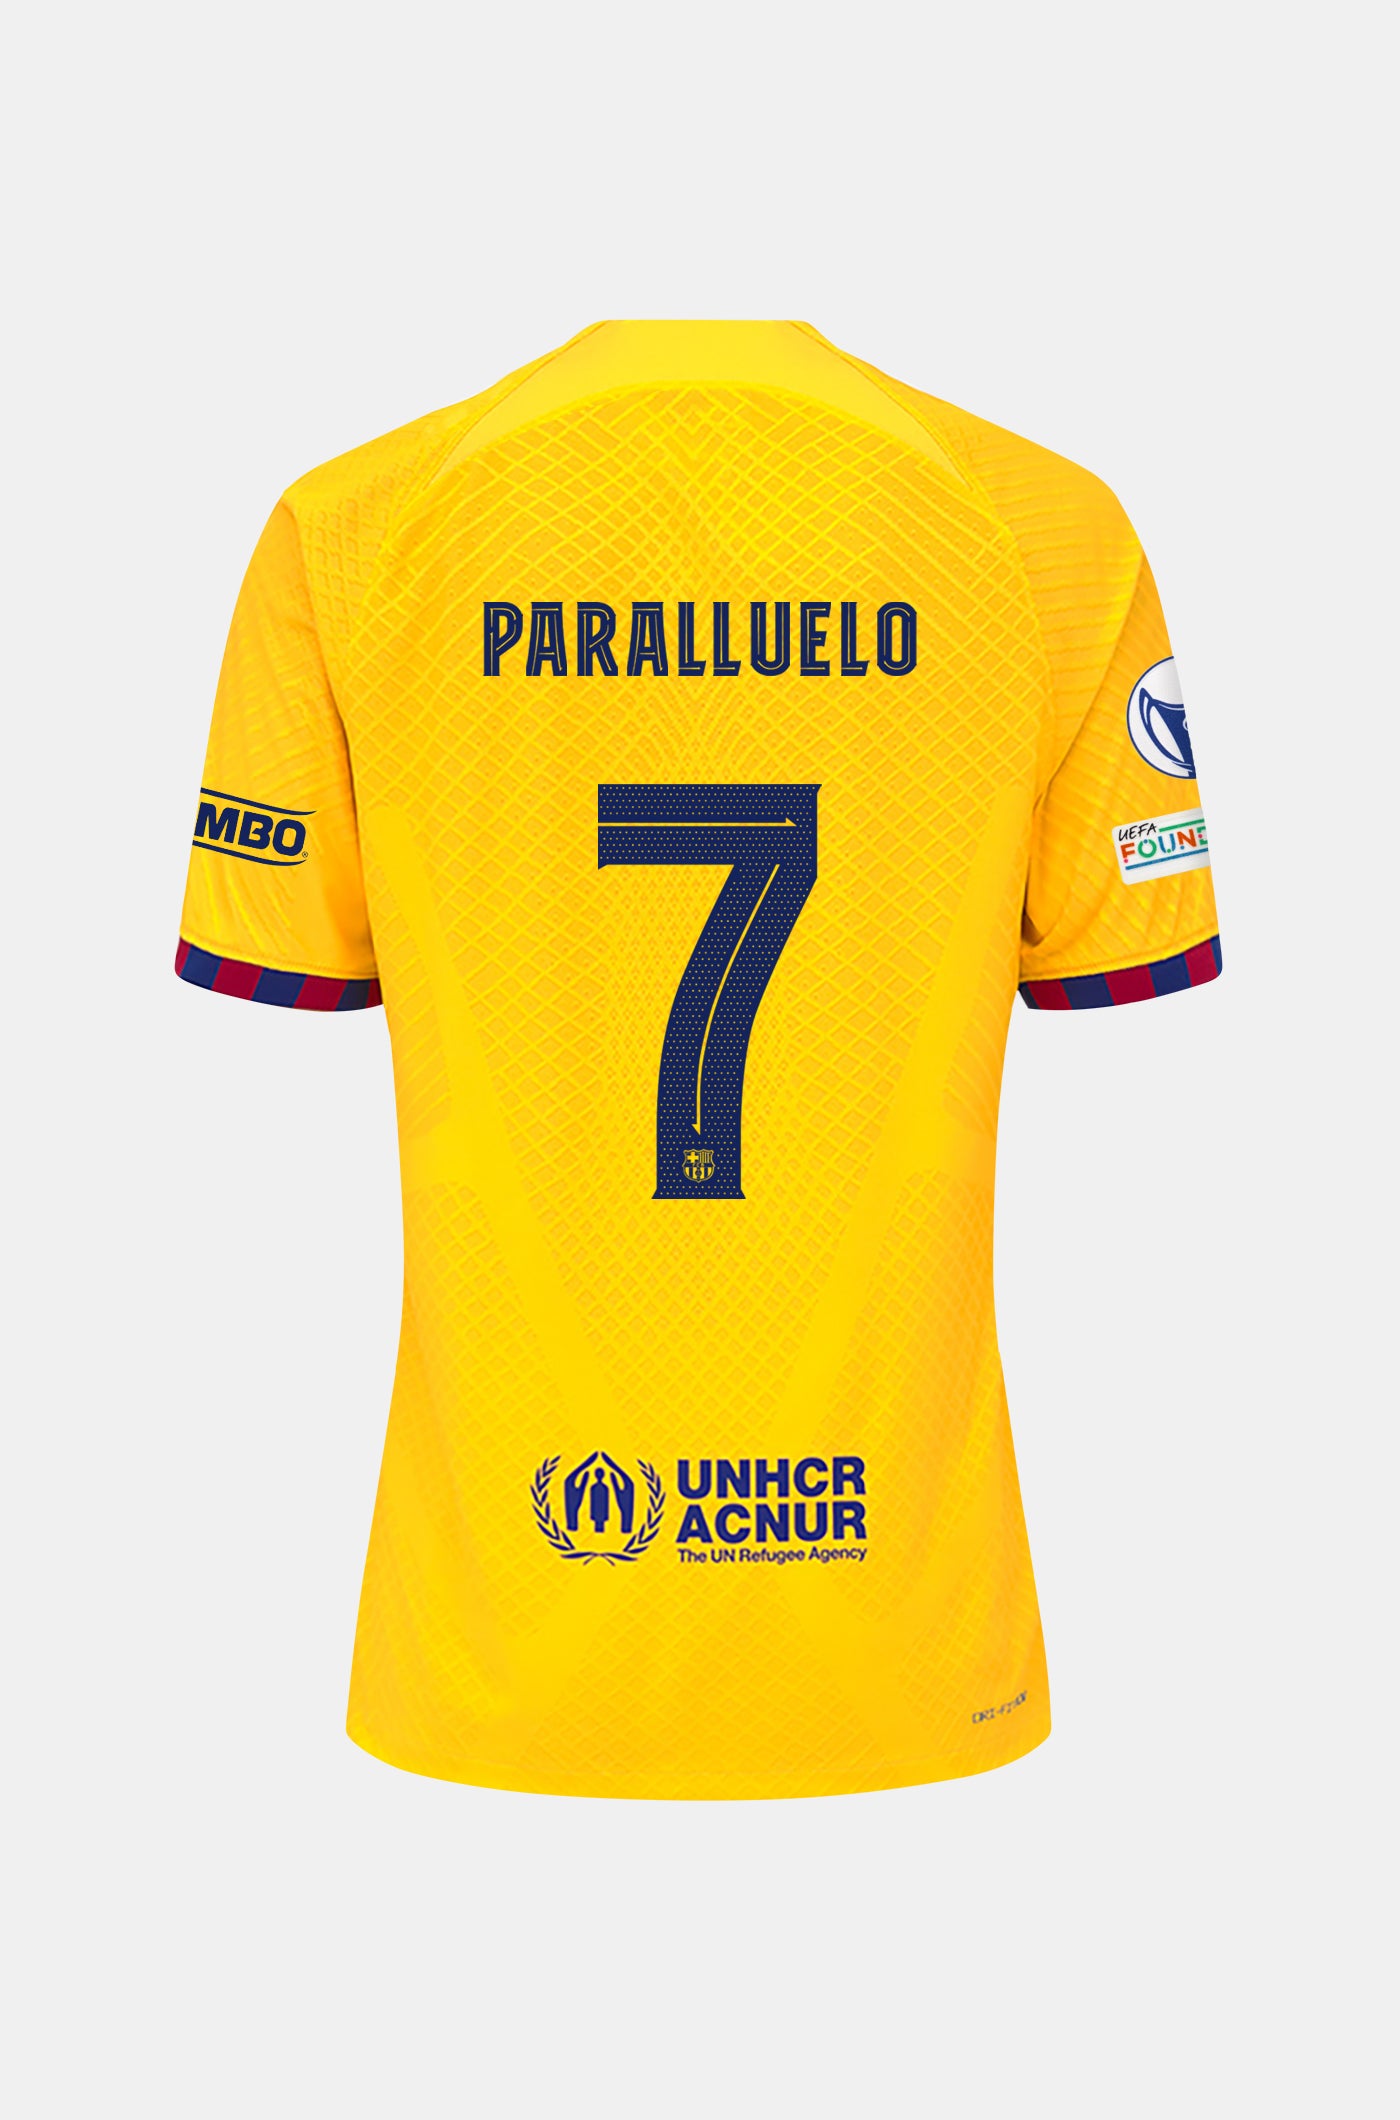 UWCL FC Barcelona fourth shirt 23/24 Player's Edition - PARALLUELO